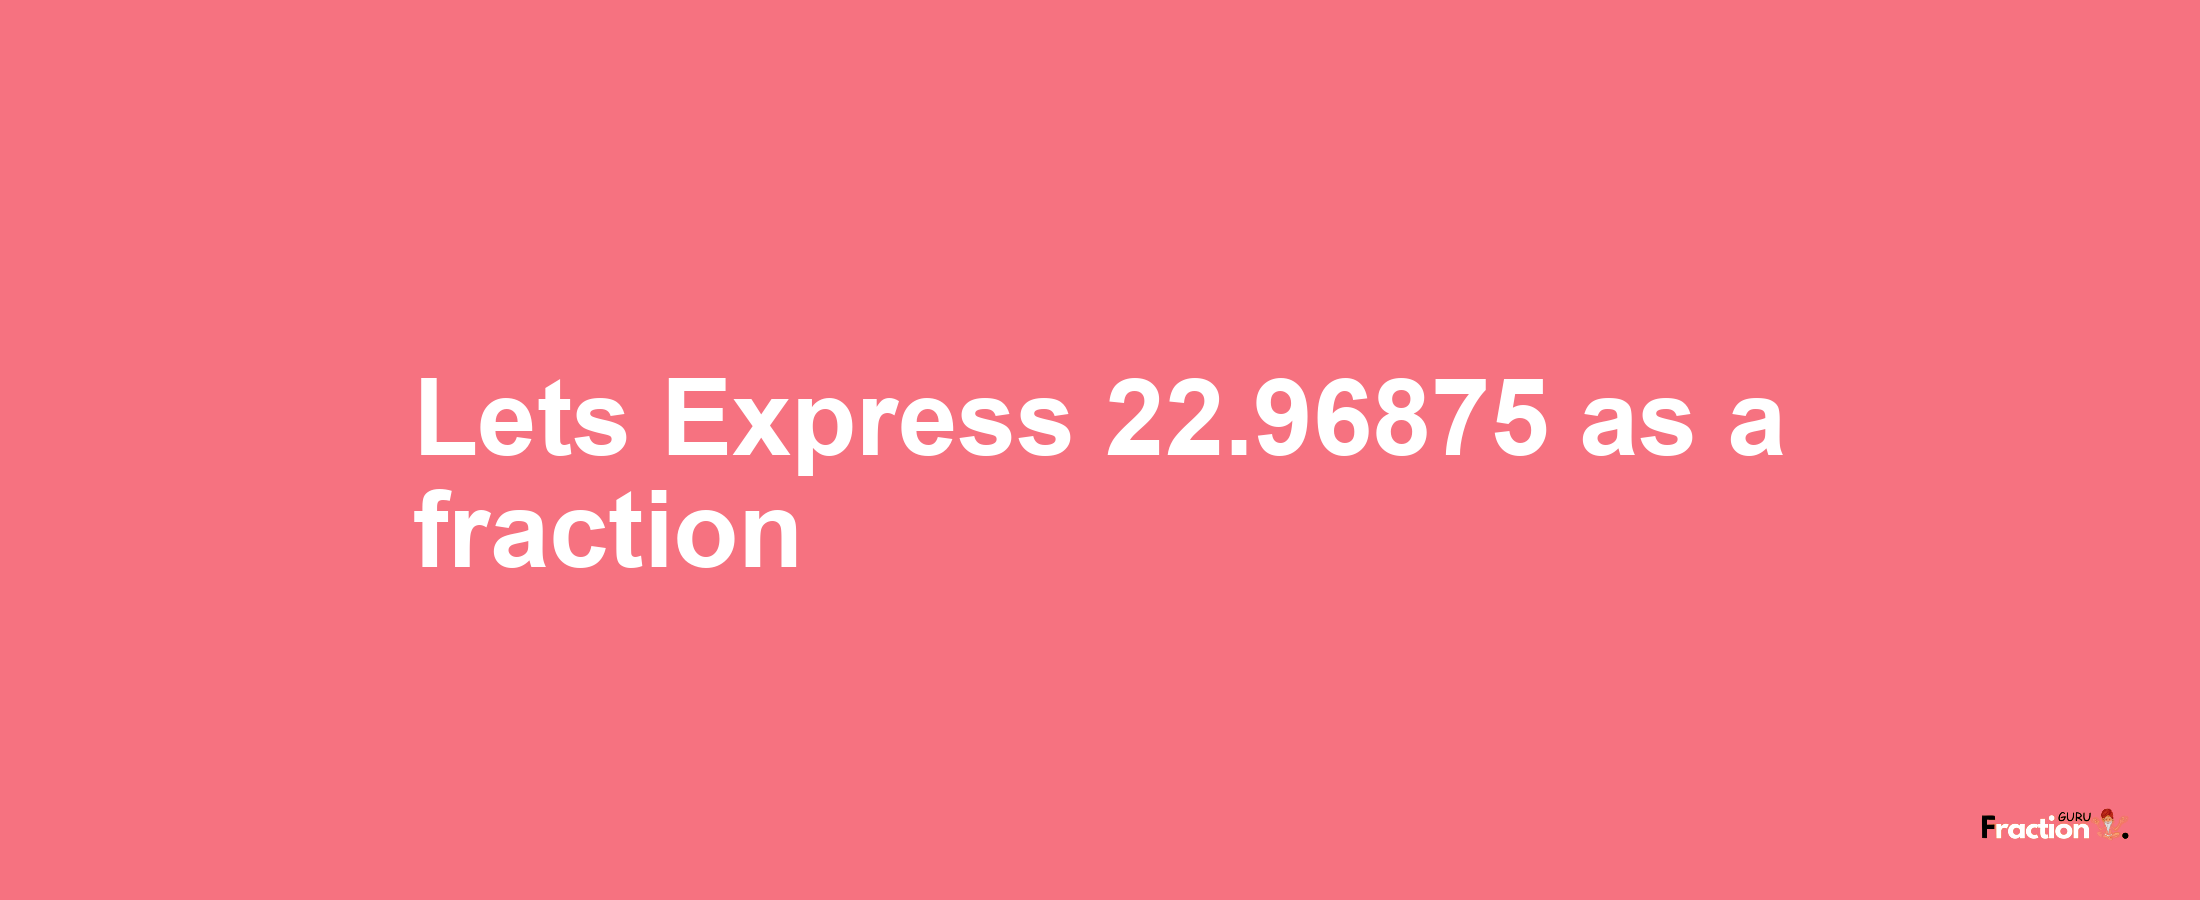 Lets Express 22.96875 as afraction